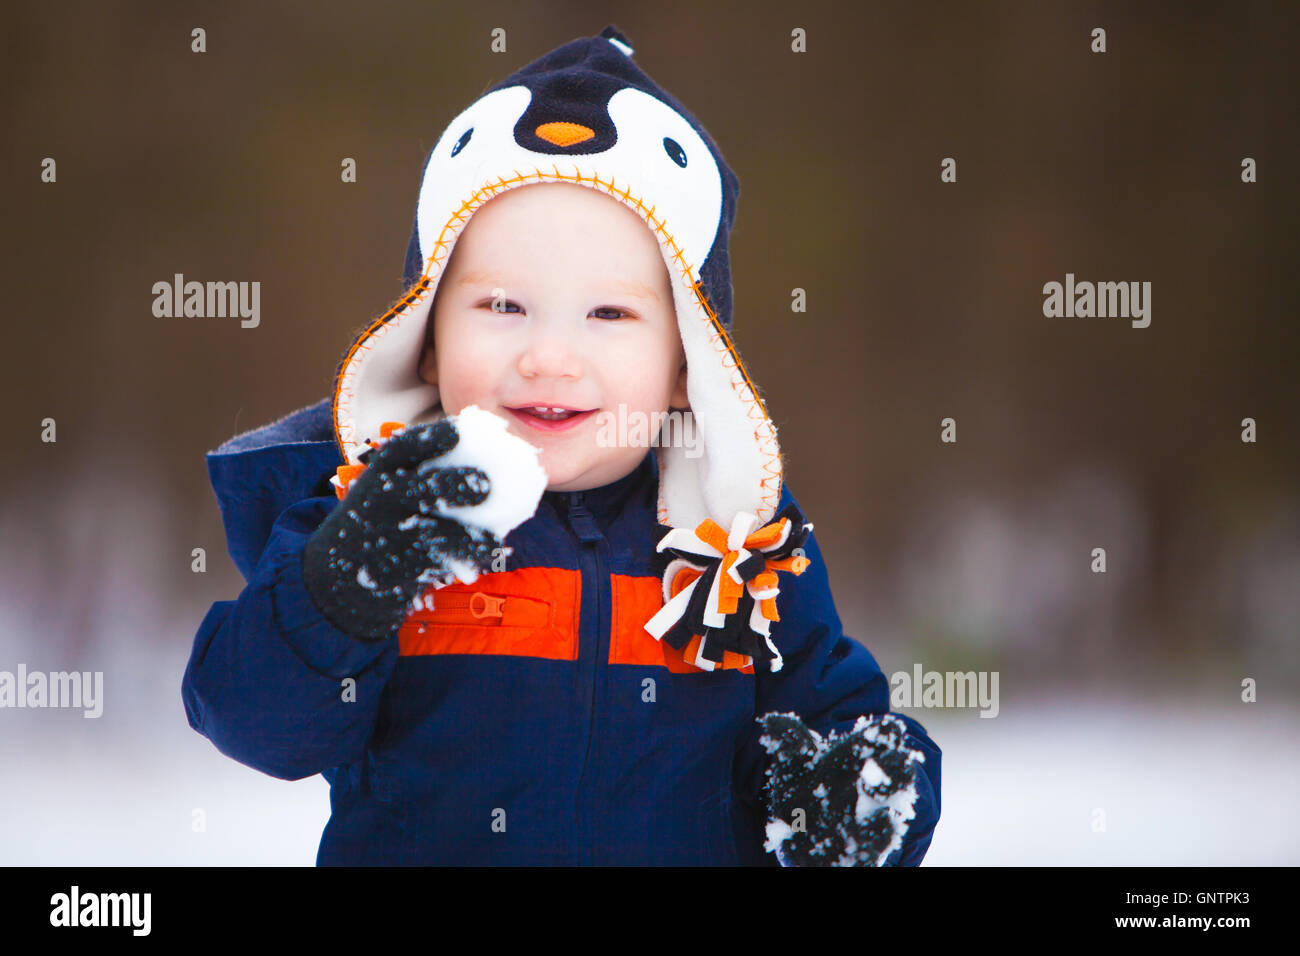 A young boy holding a snow ball and wearing a winter coat and hat smiles as he looks the camera. Stock Photo